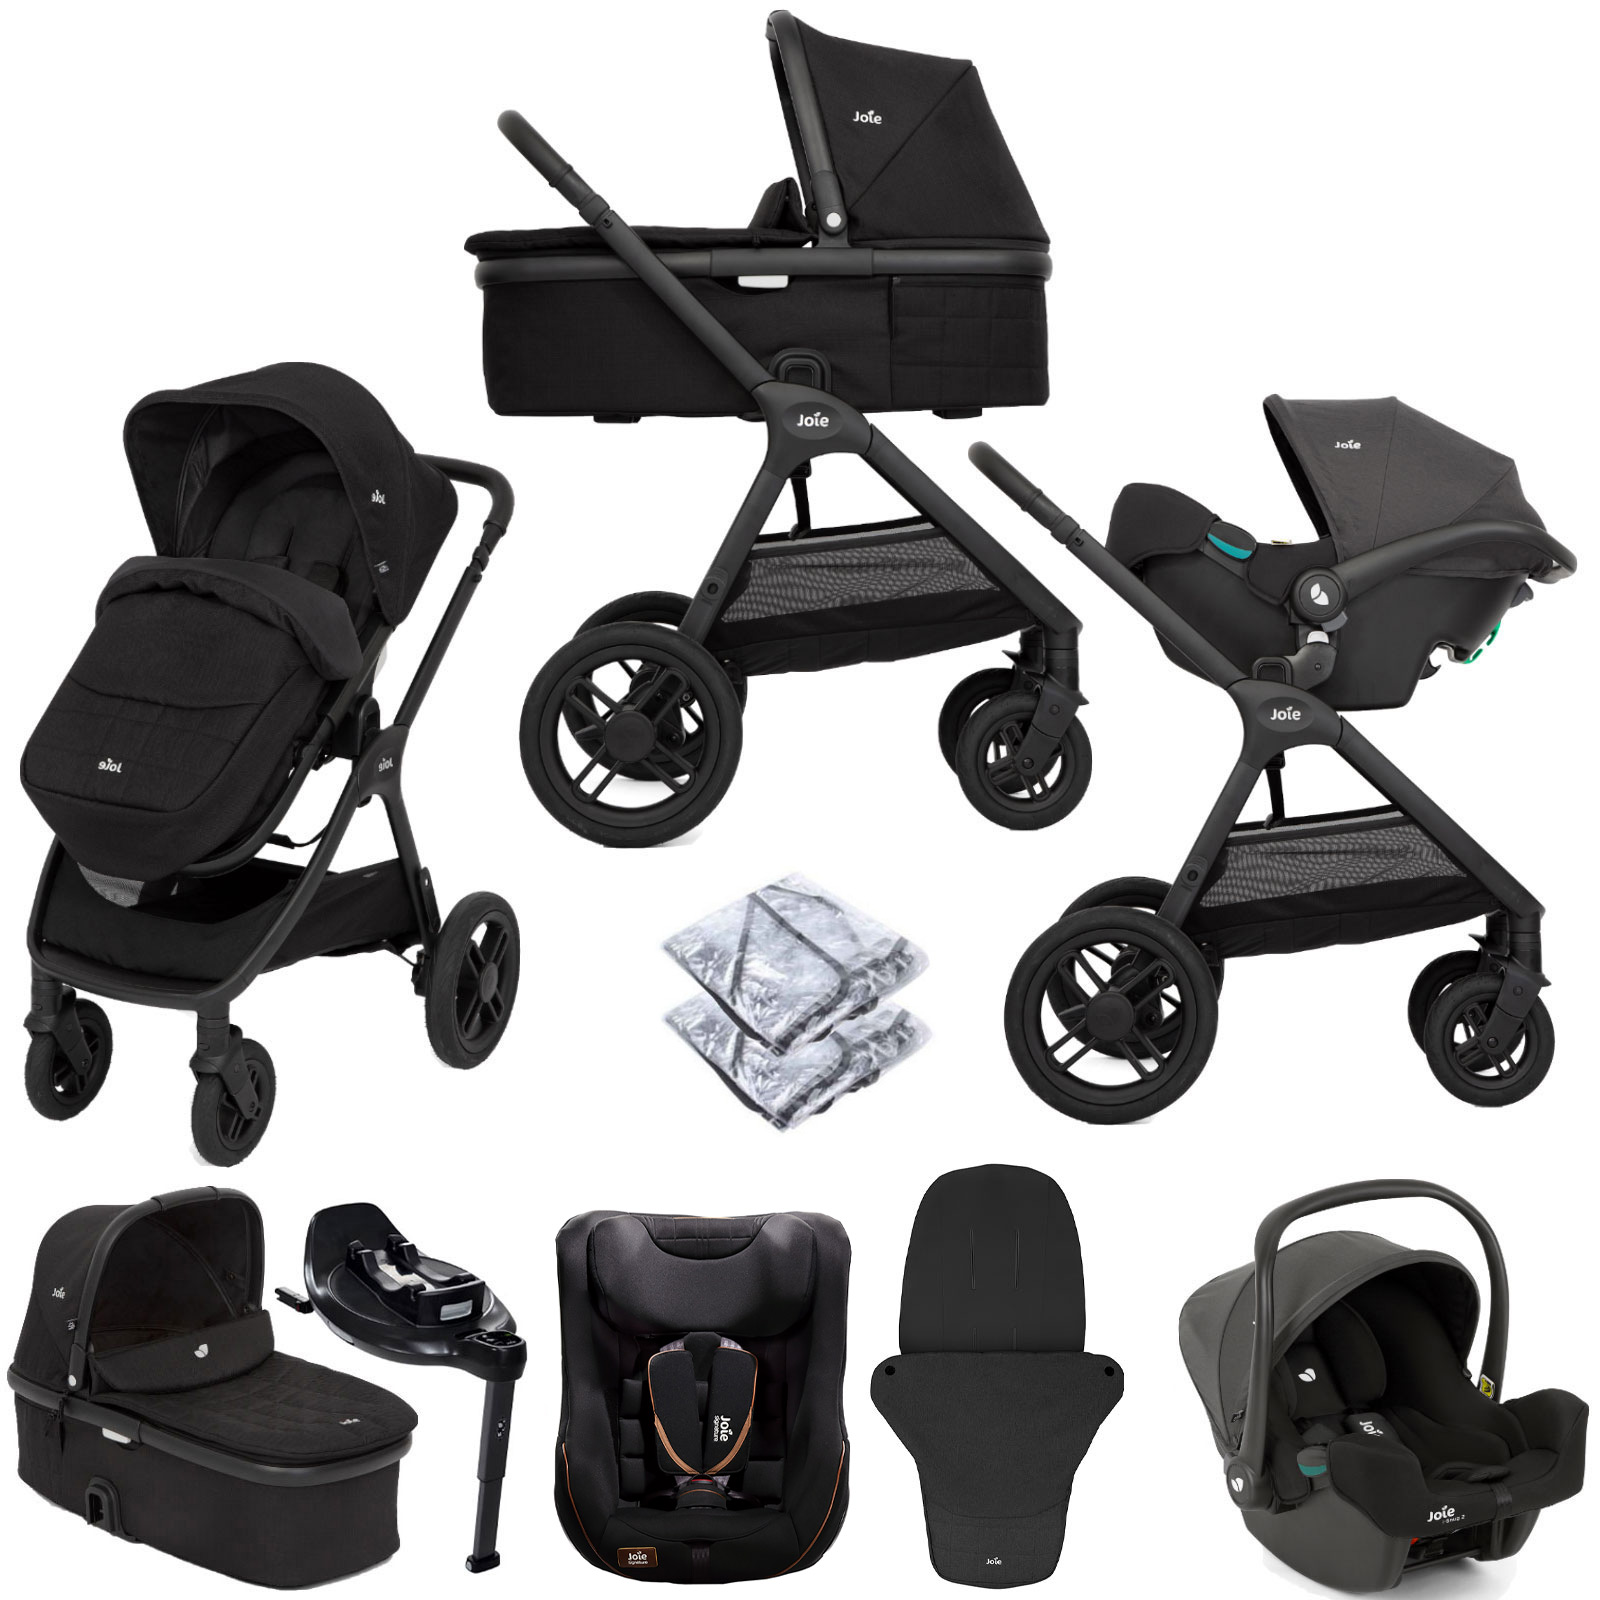 Joie Honour Pushchair Travel System with Carrycot, i-Harbour Car Seat & i-Base Encore ISOFIX Base - Shale